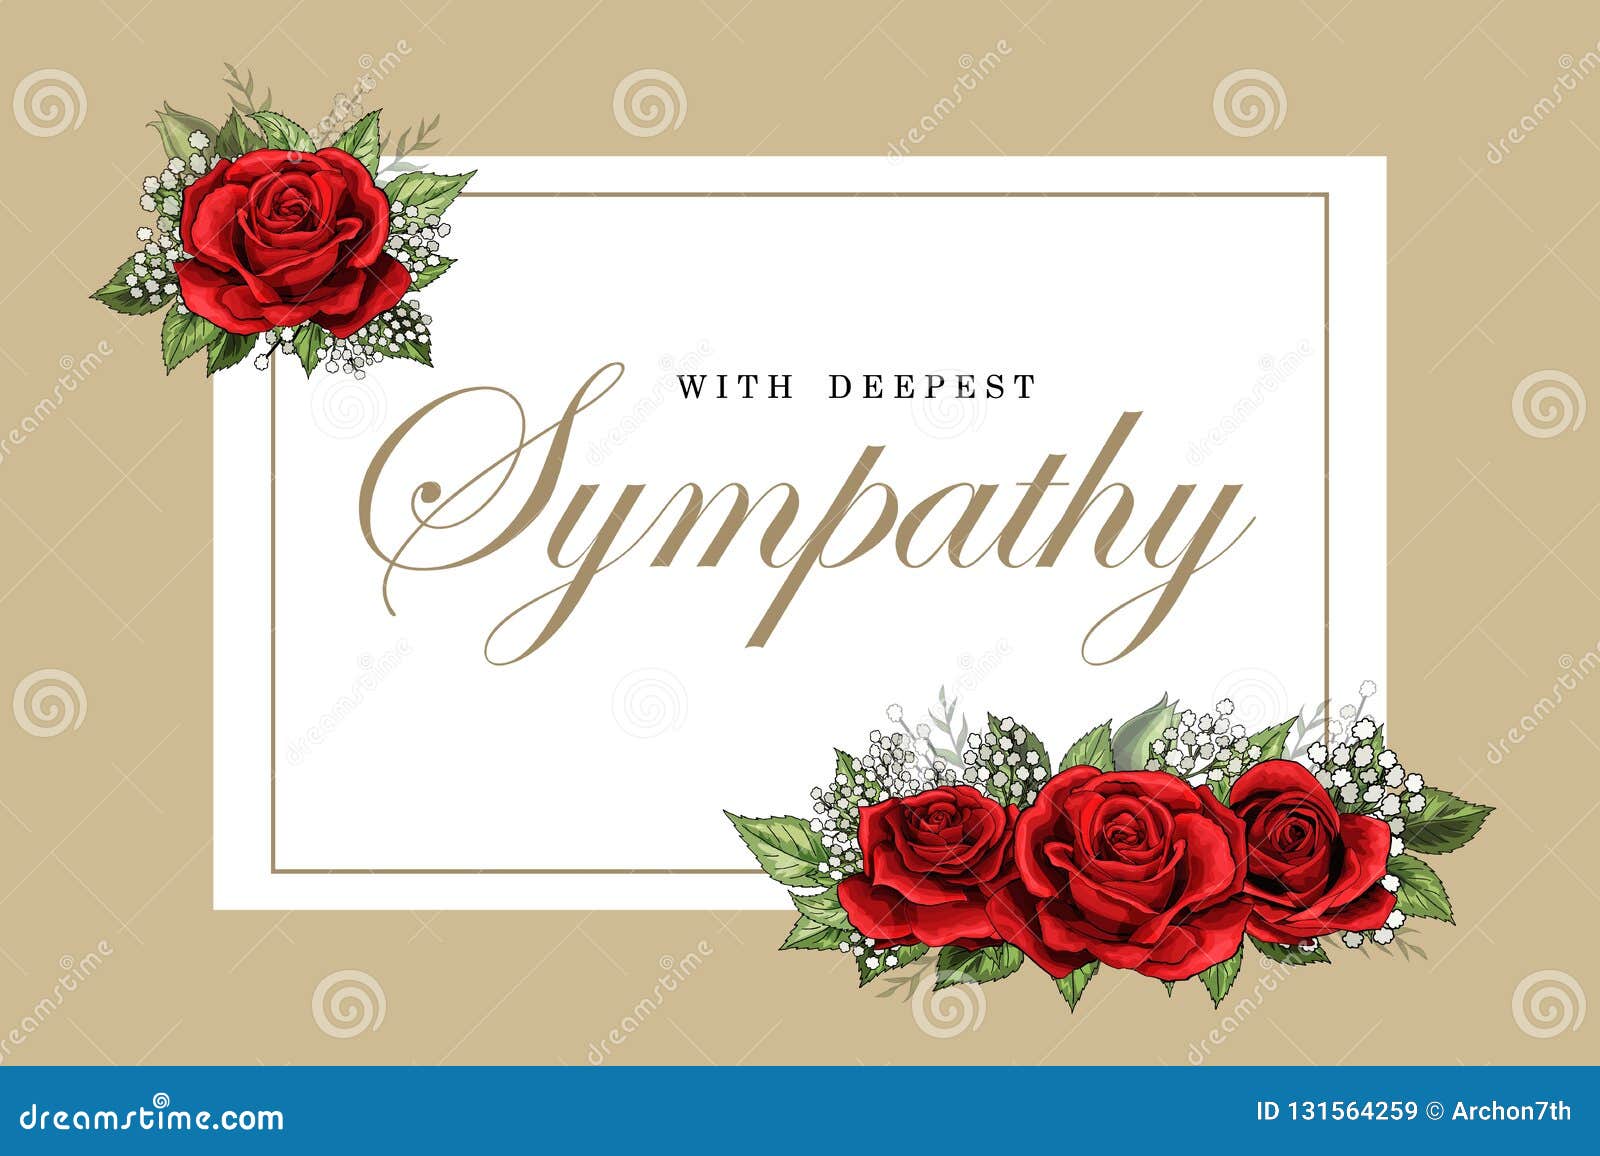 Condolences Stock Illustrations – 20 Condolences Stock With Sorry For Your Loss Card Template